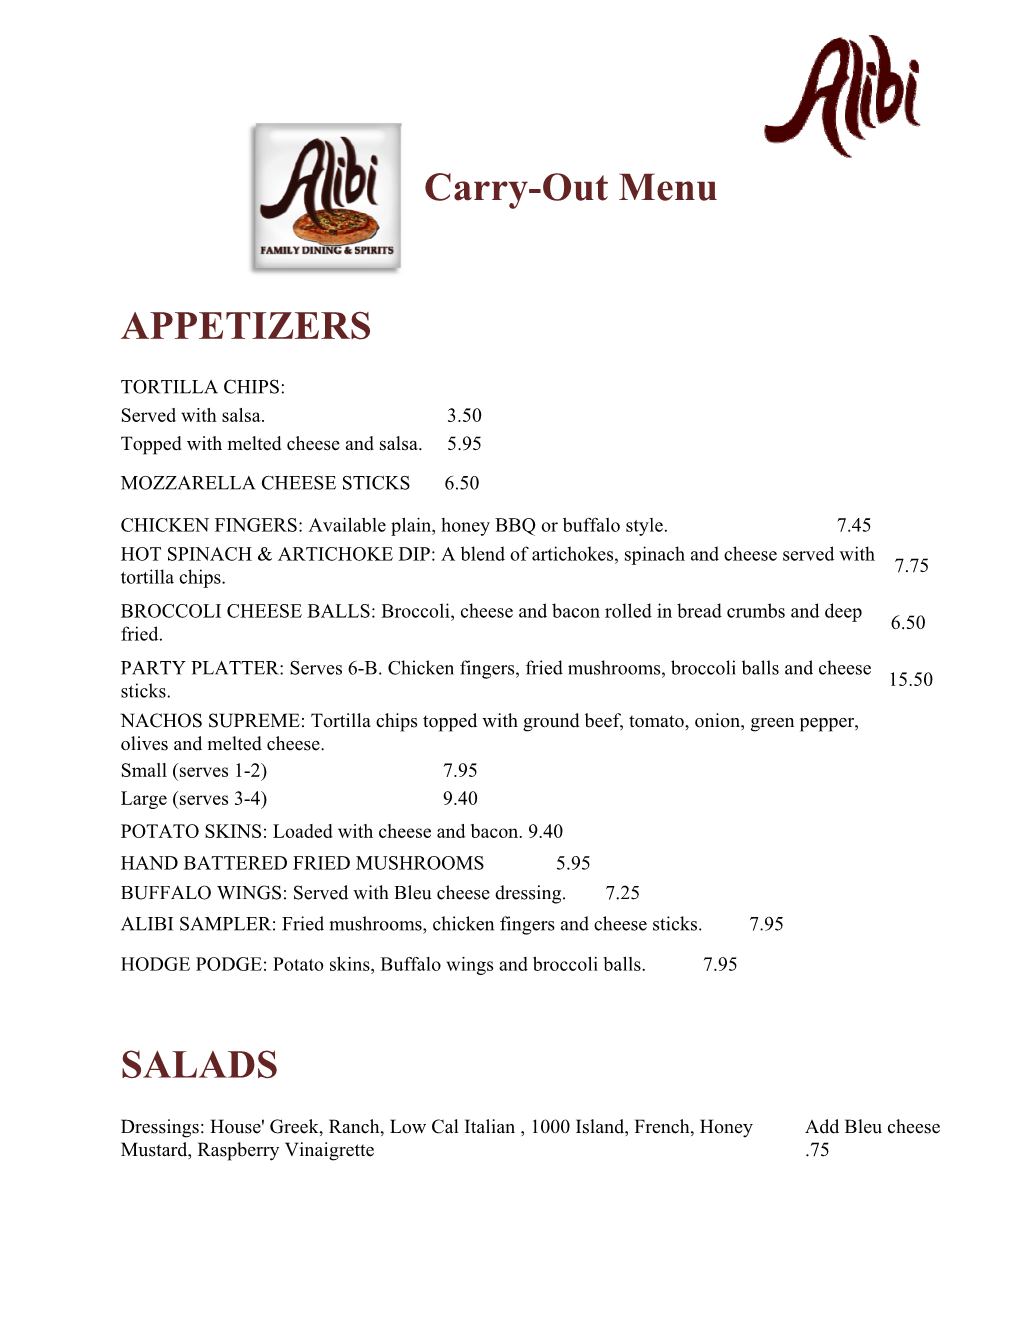 APPETIZERS SALADS Carry-Out Menu